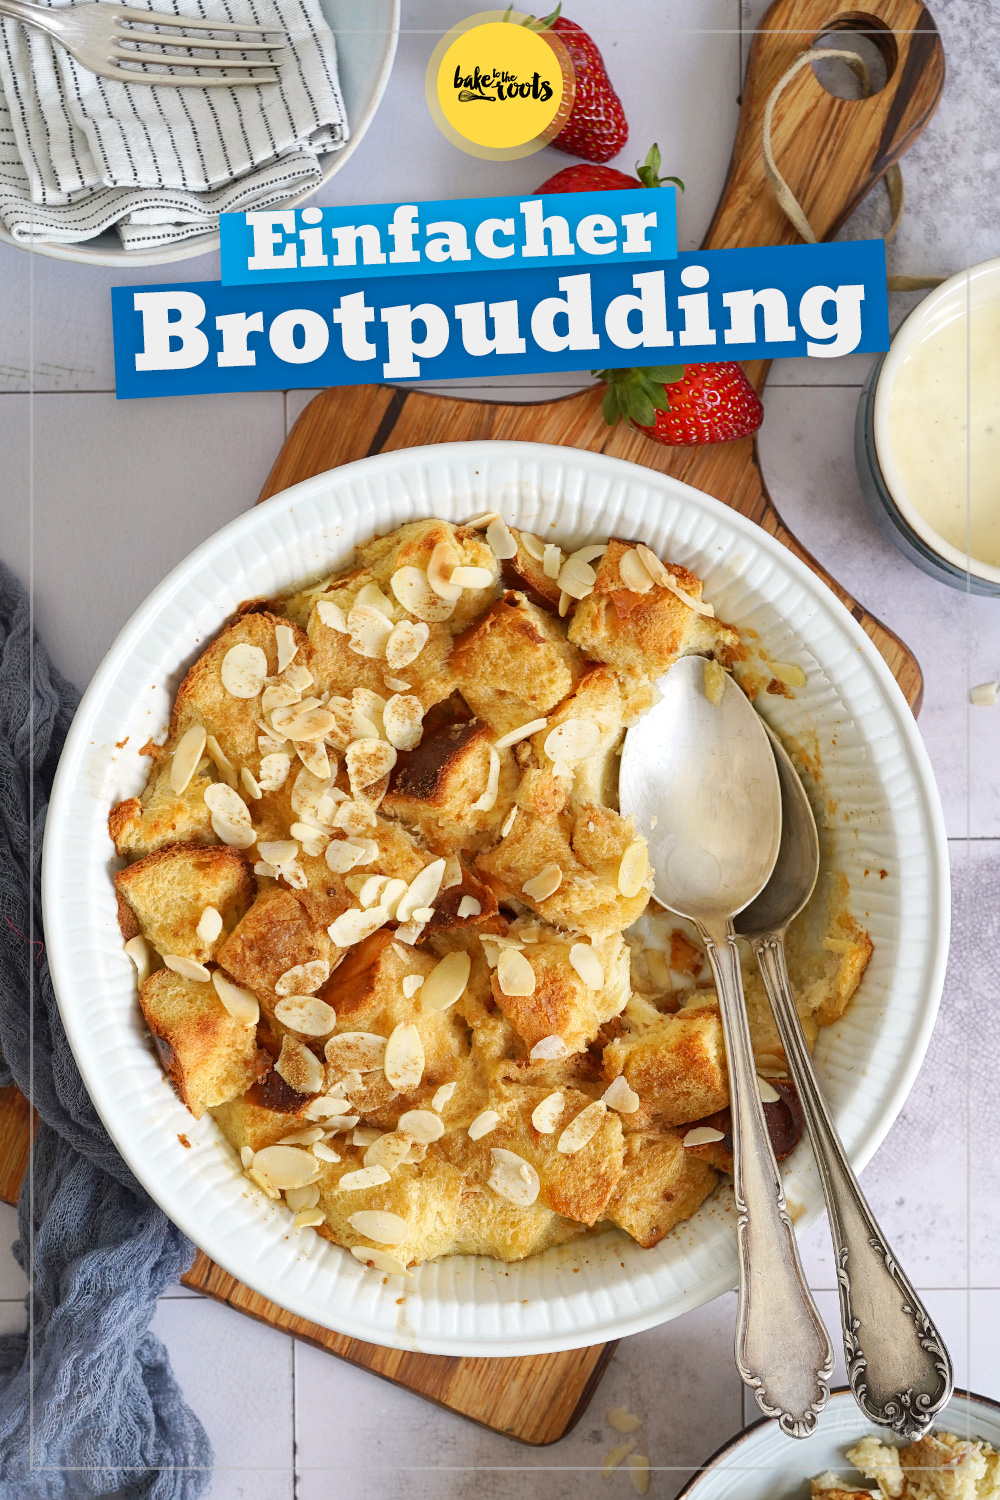 Einfacher Brotpudding | Bake to the roots